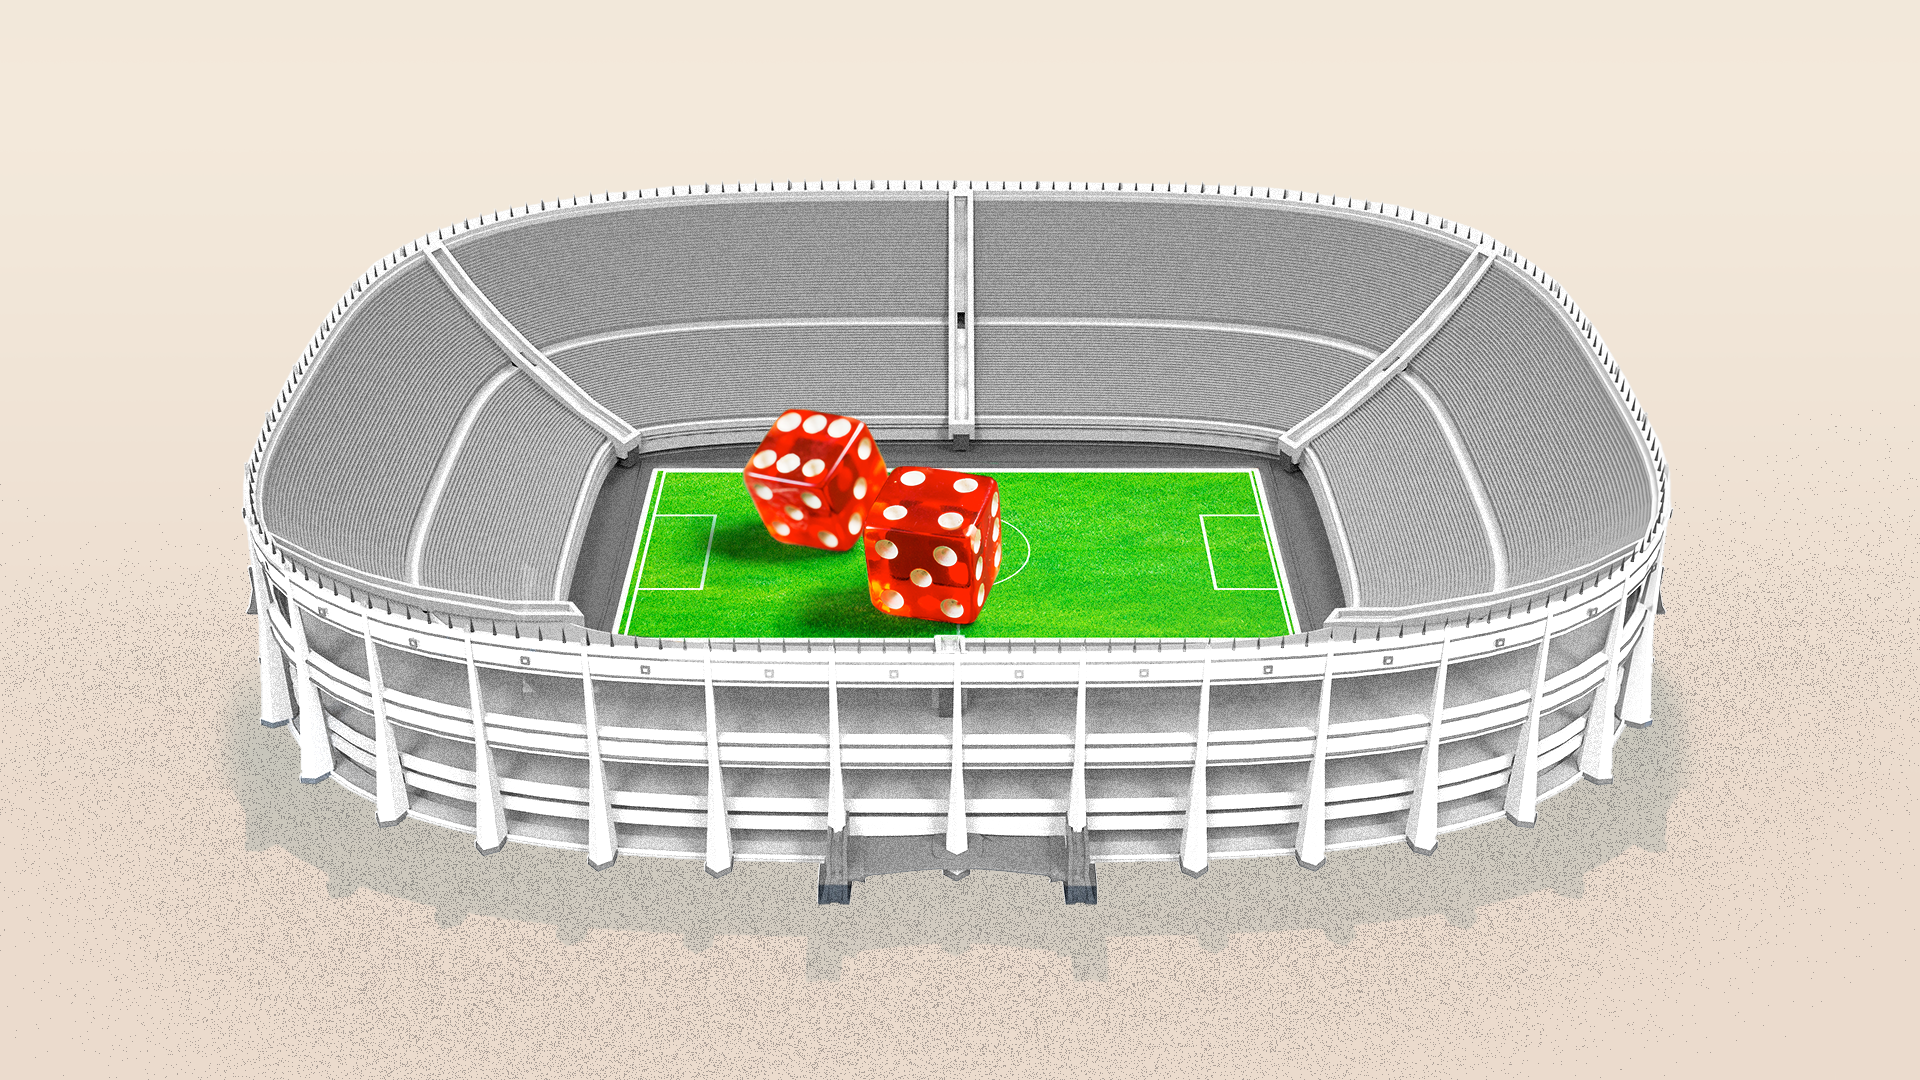 Stadium with two dice in the middle